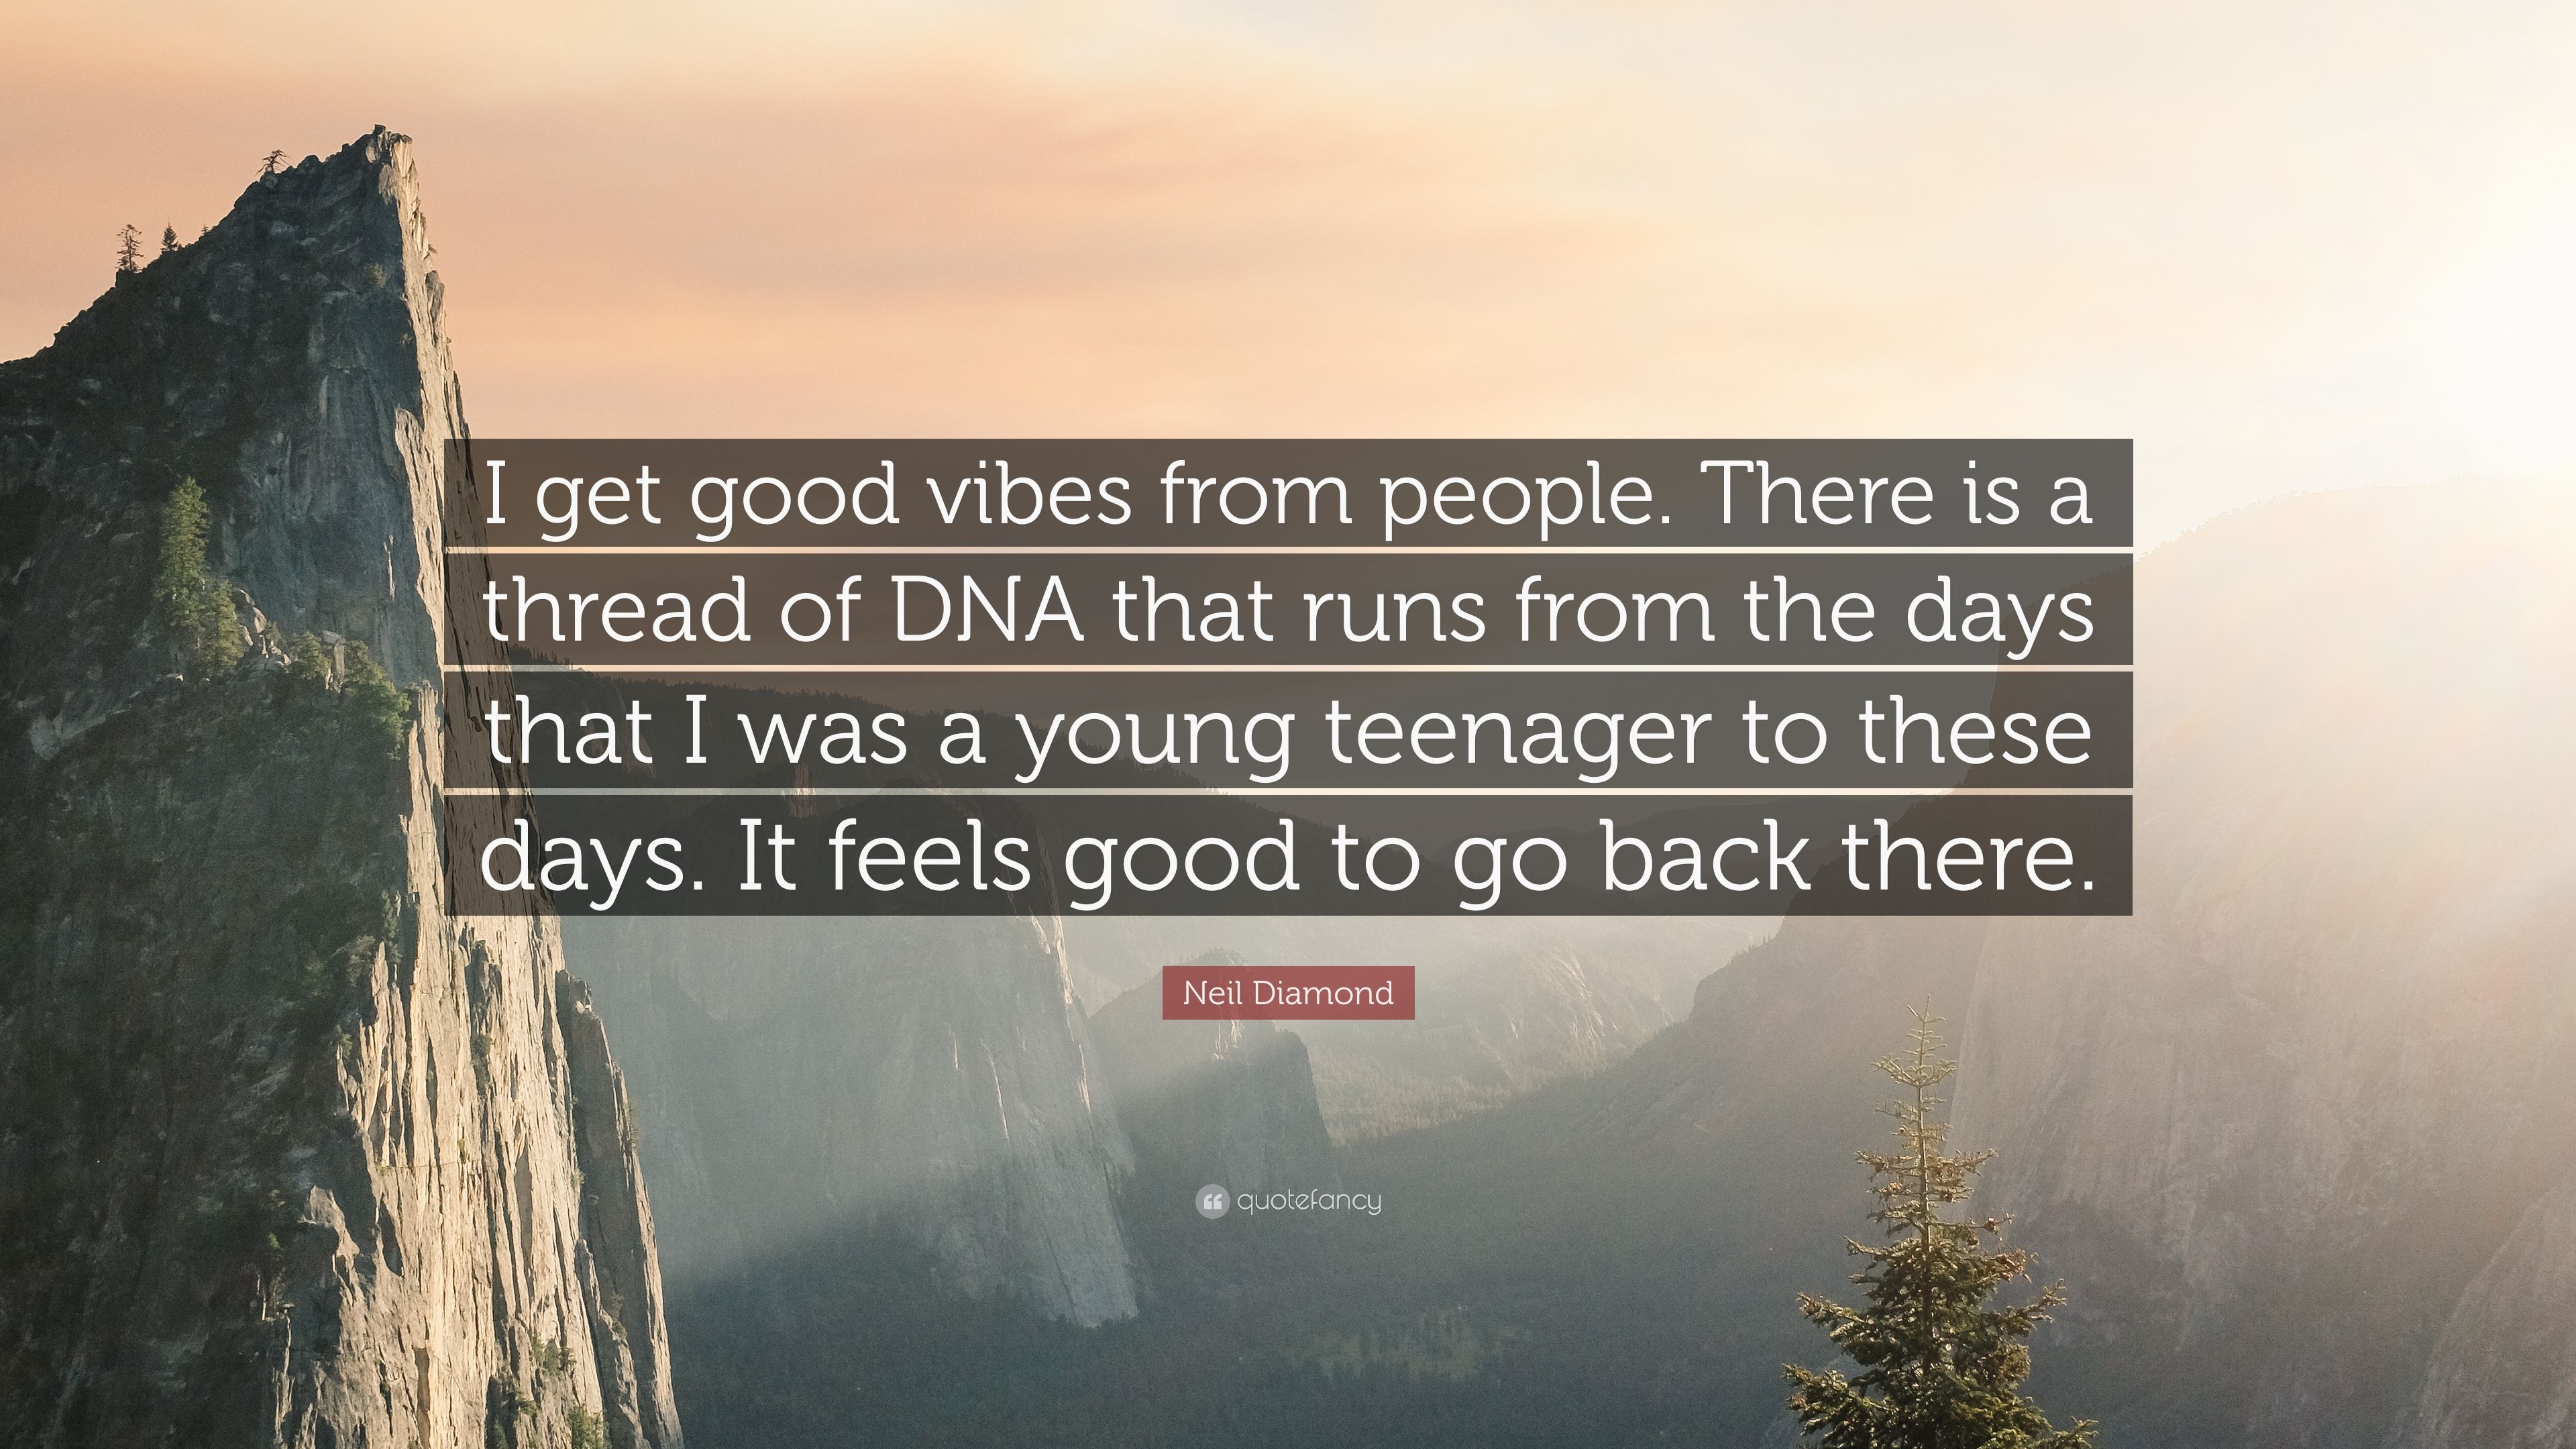 Neil Diamond Quote: “I get good vibes from people. There is a thread of DNA that runs from the days that I was a young teenager to these days.” (7 wallpaper)